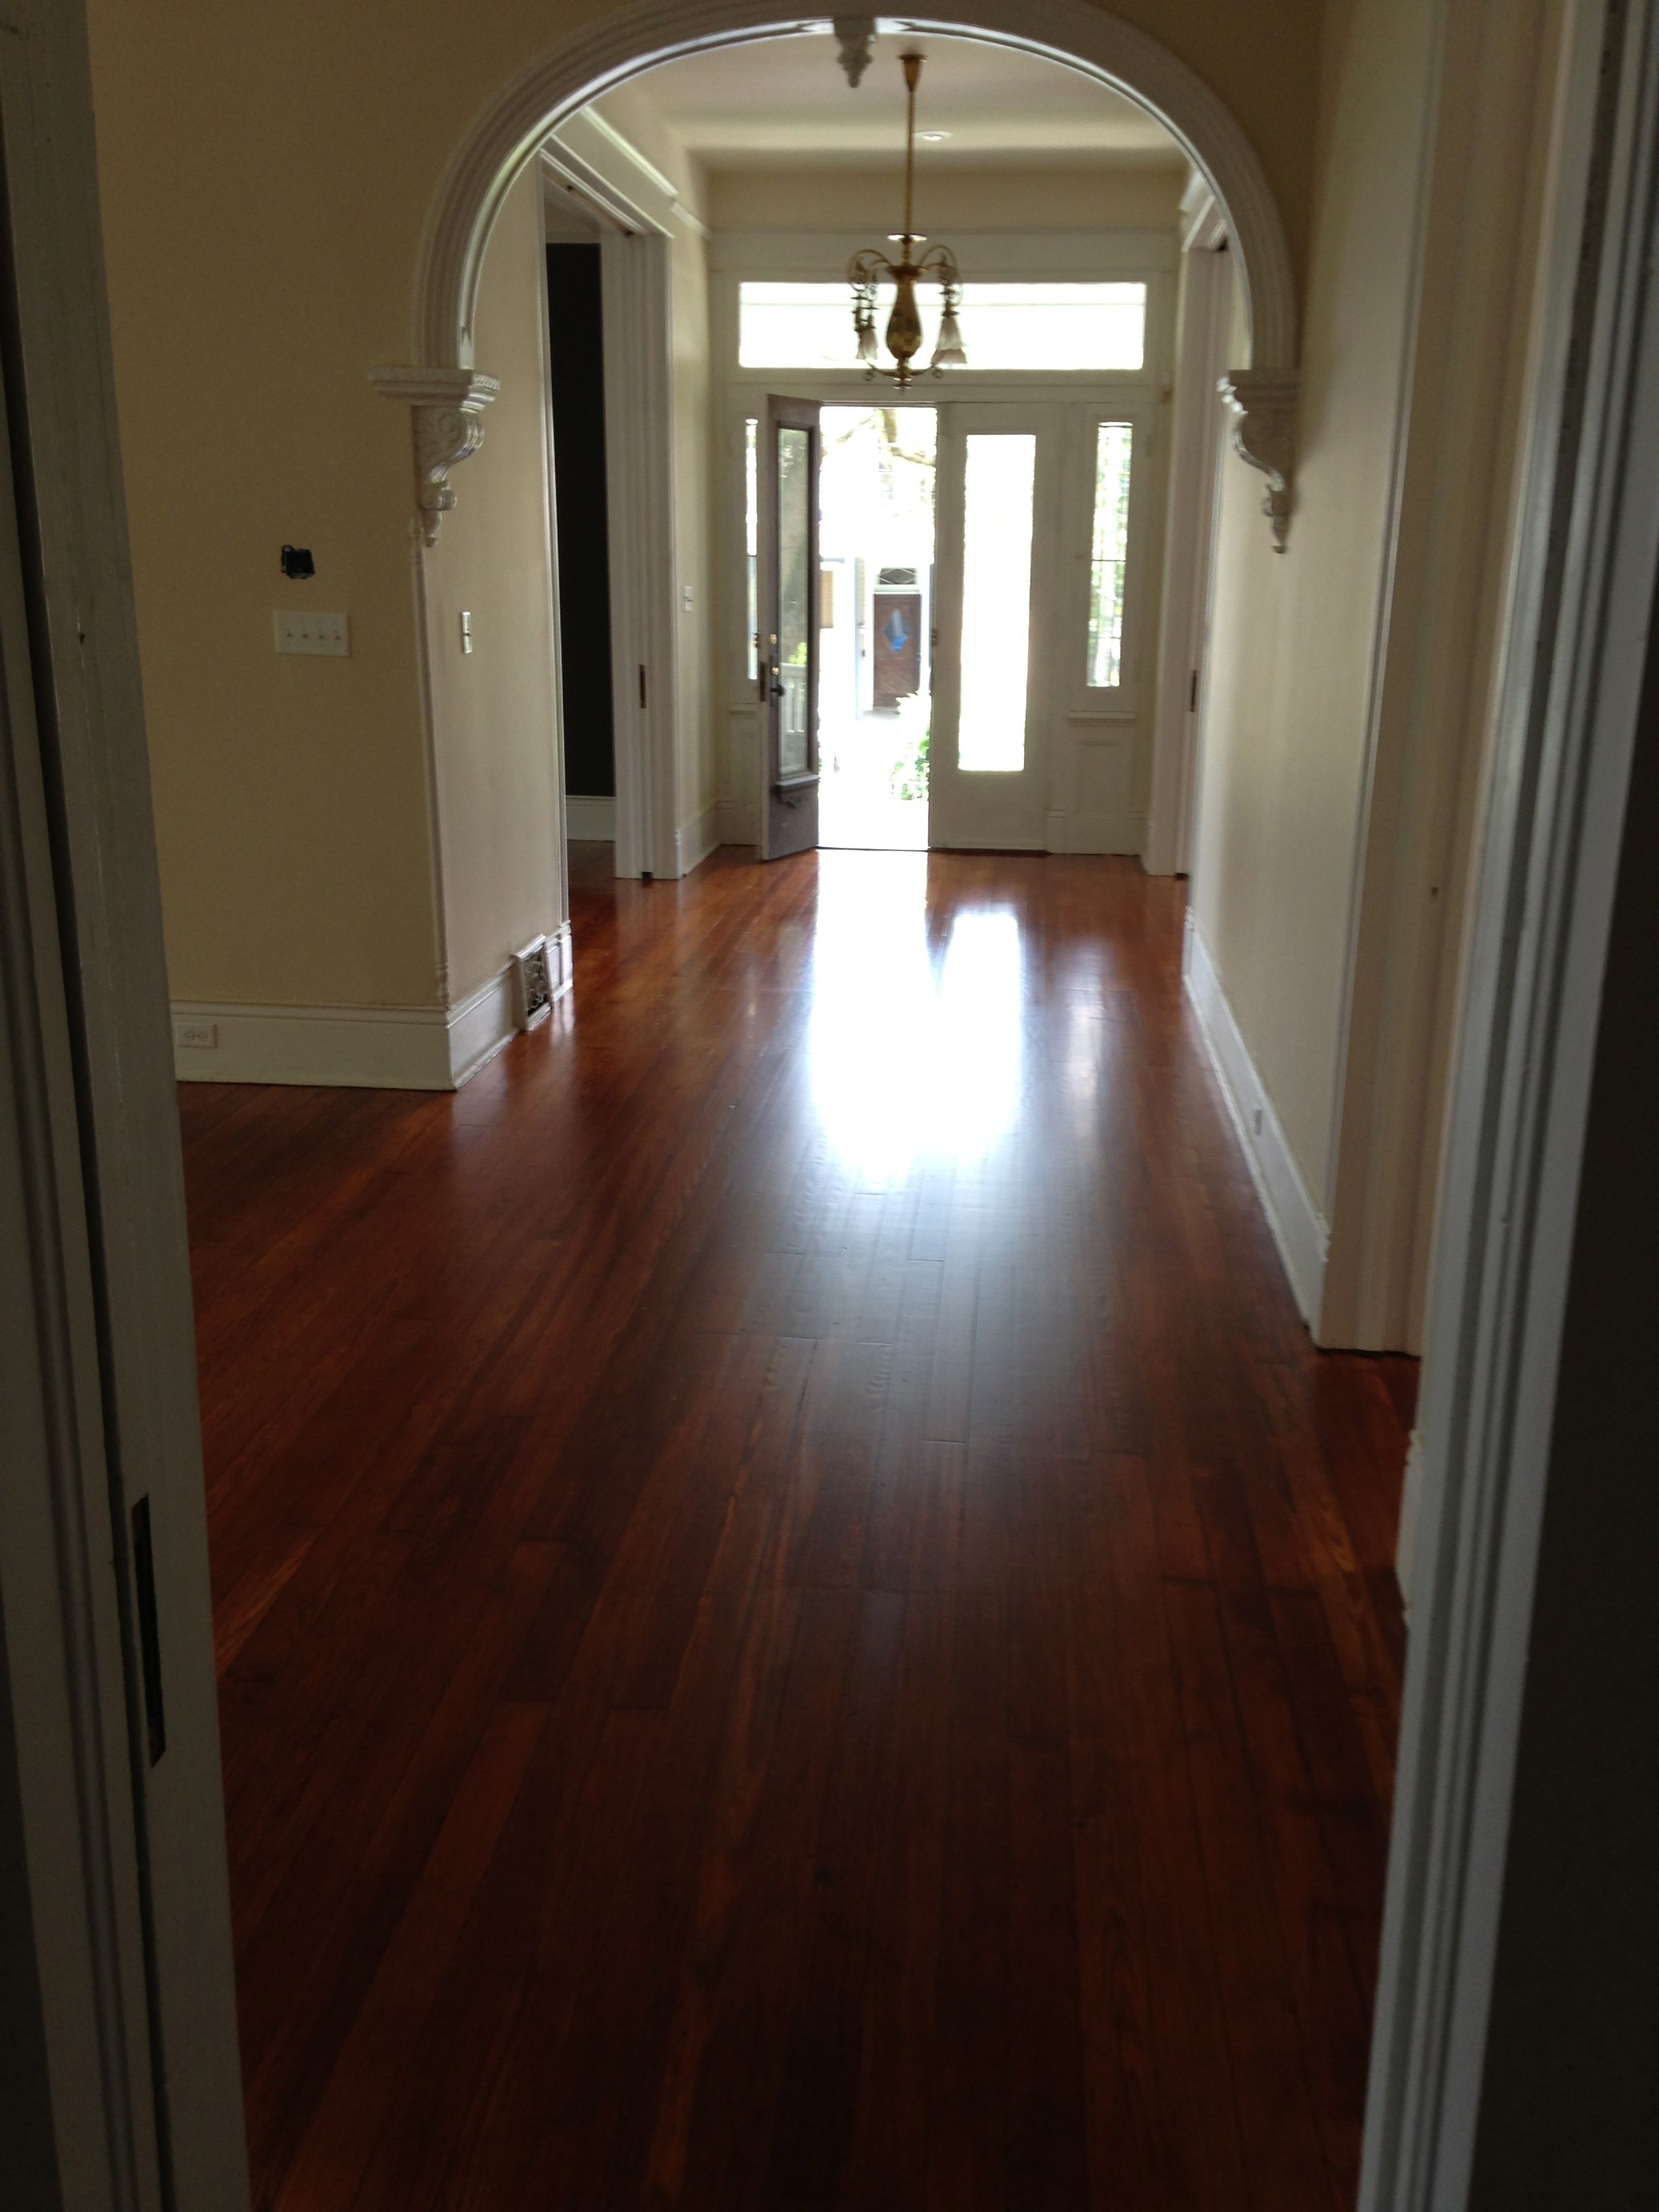 Refinished hardwood flooring in an arched foyer at front entrance